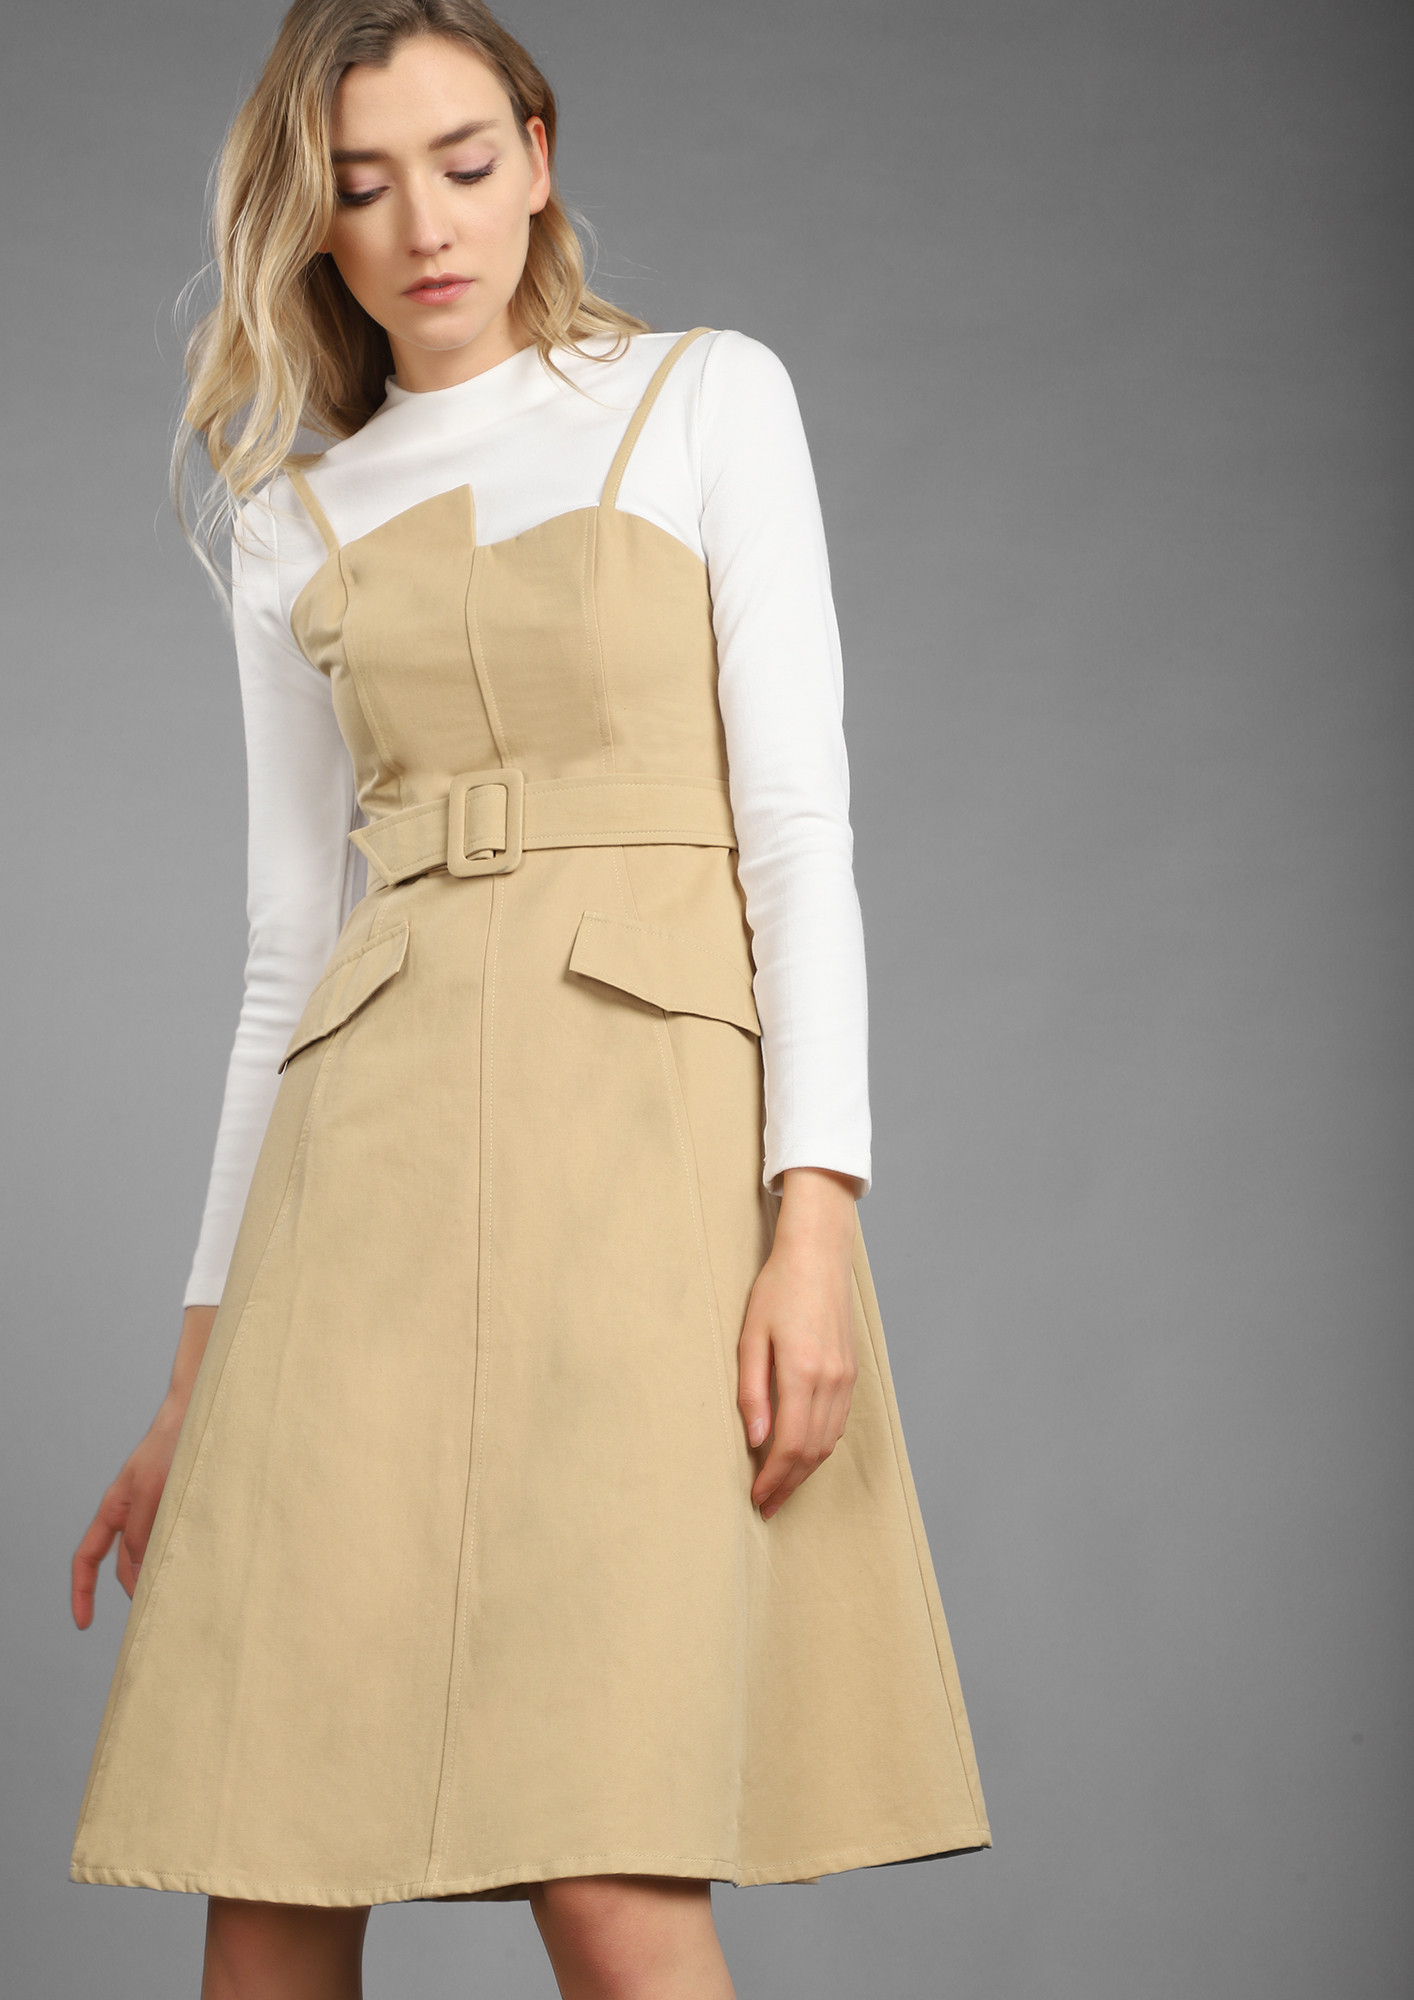 ON FOR A BUSY DAY BEIGE MIDI DRESS